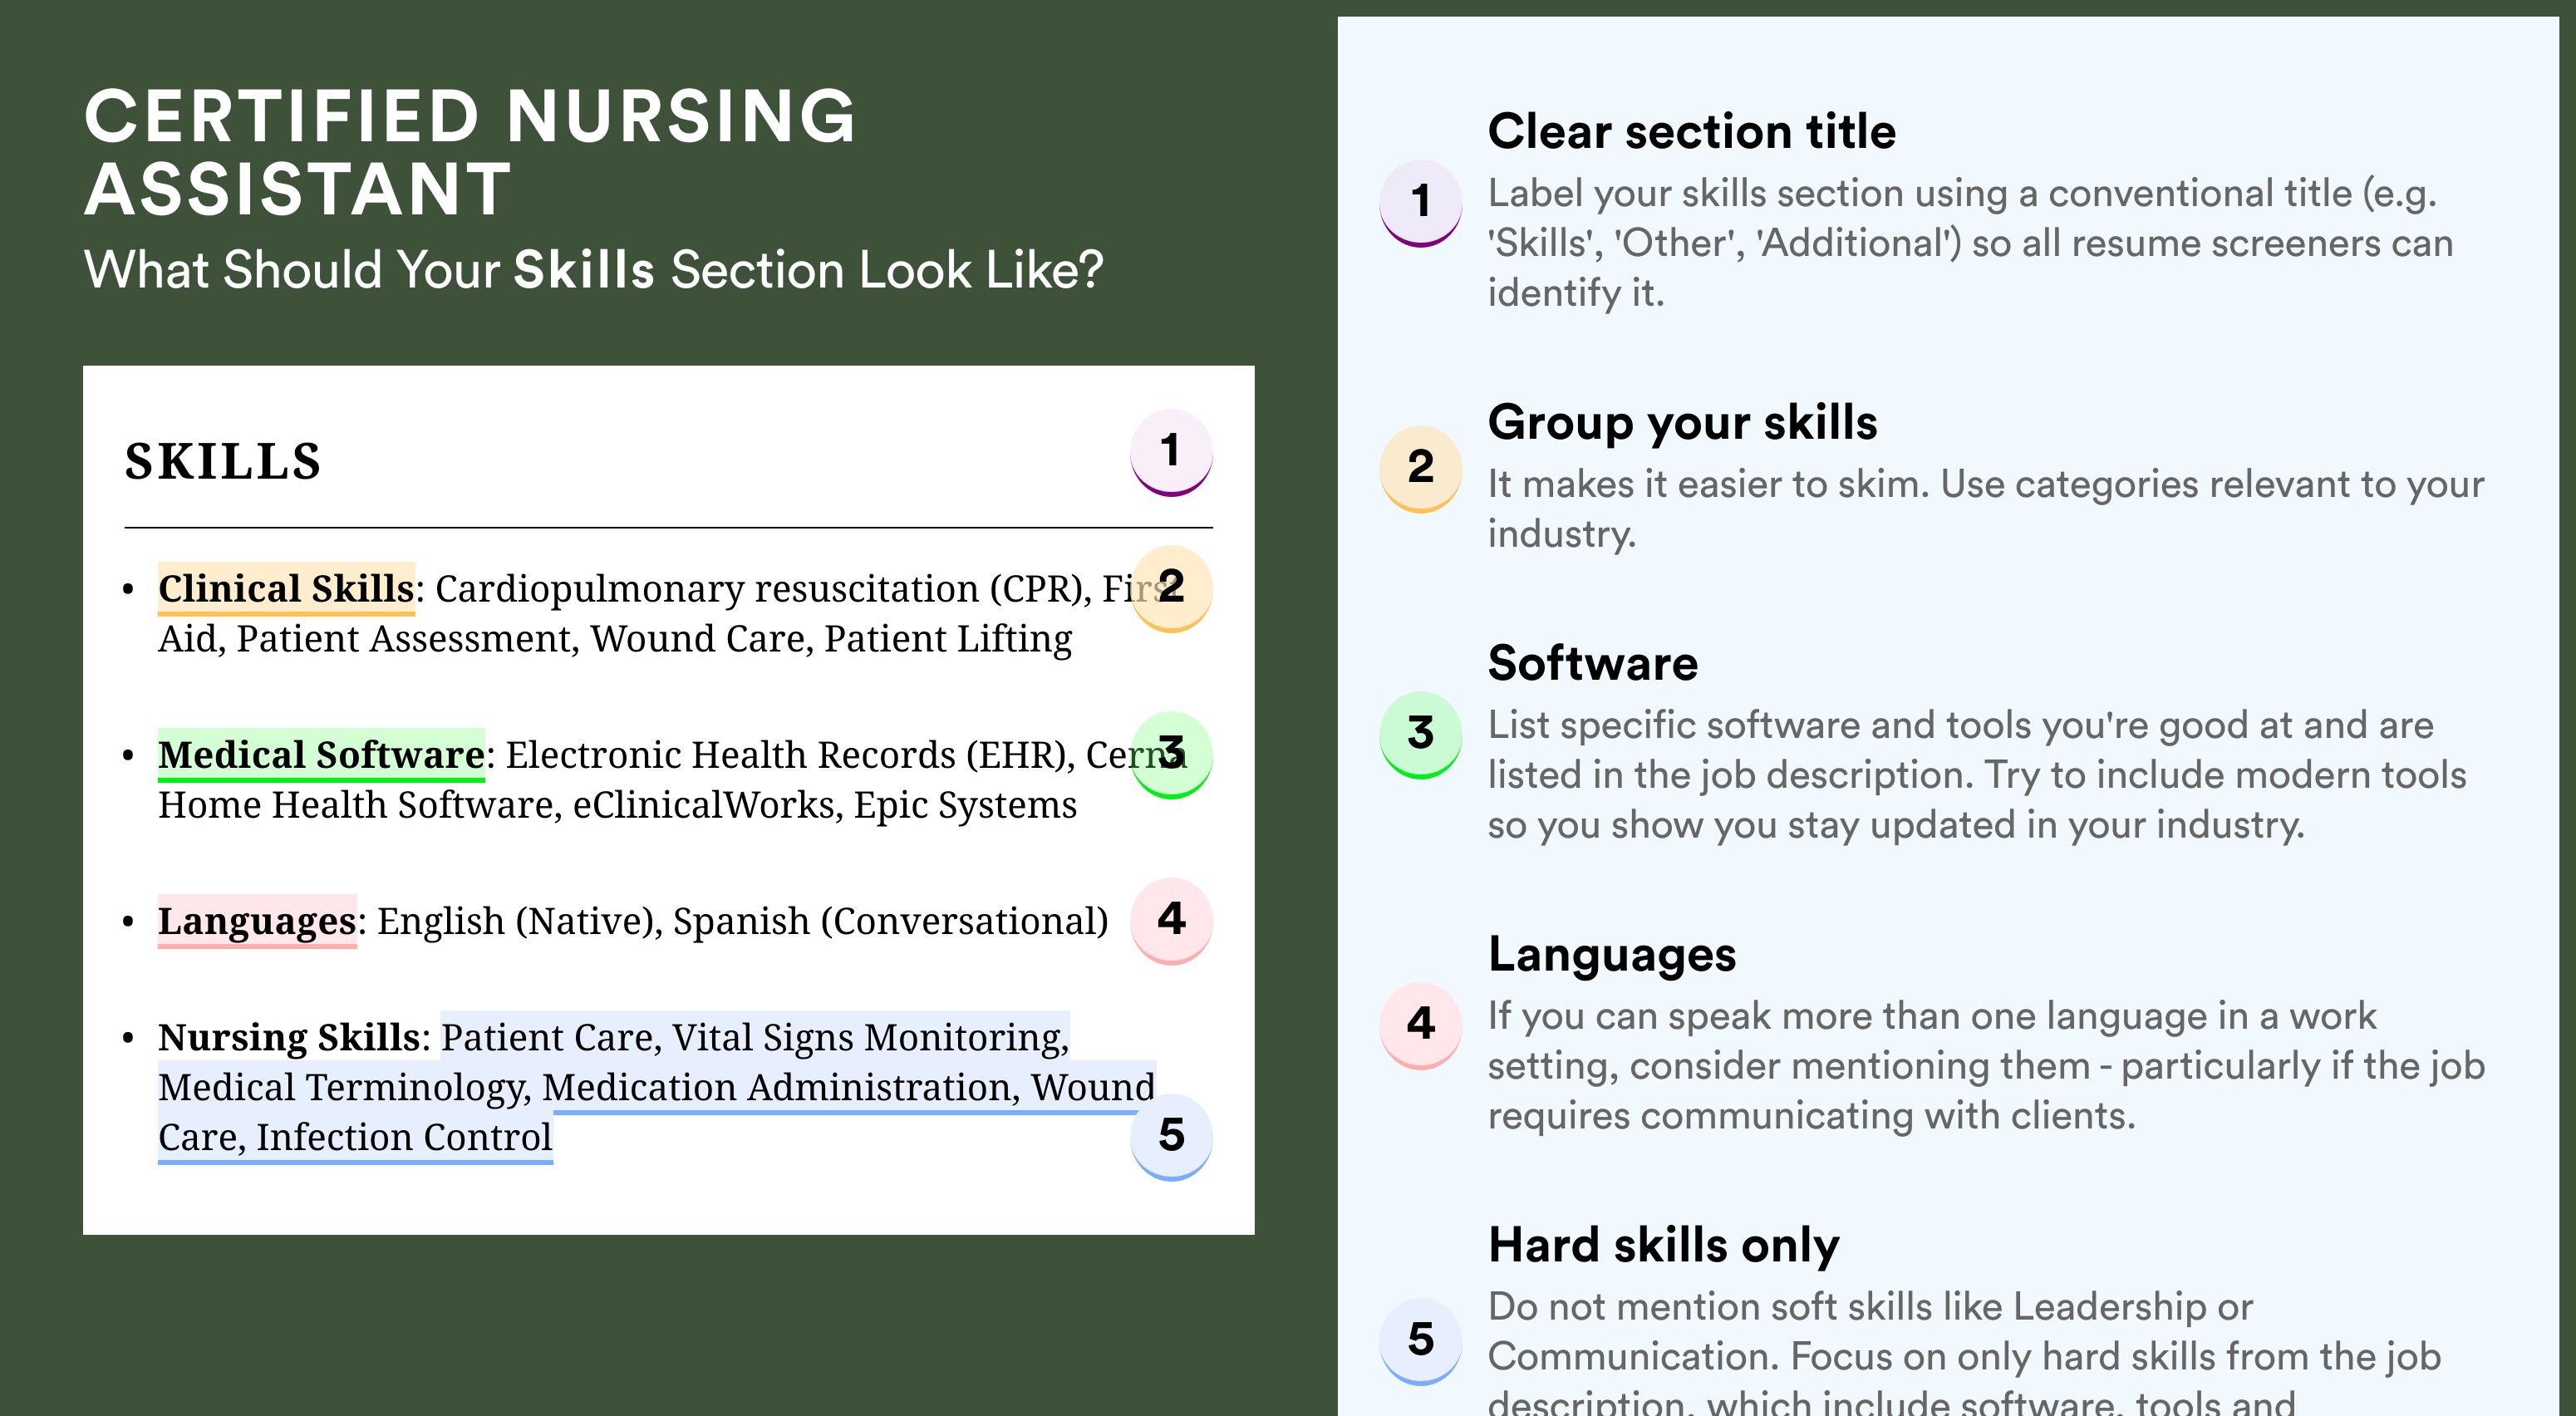 How To Write Your Skills Section - Certified Nursing Assistant Roles